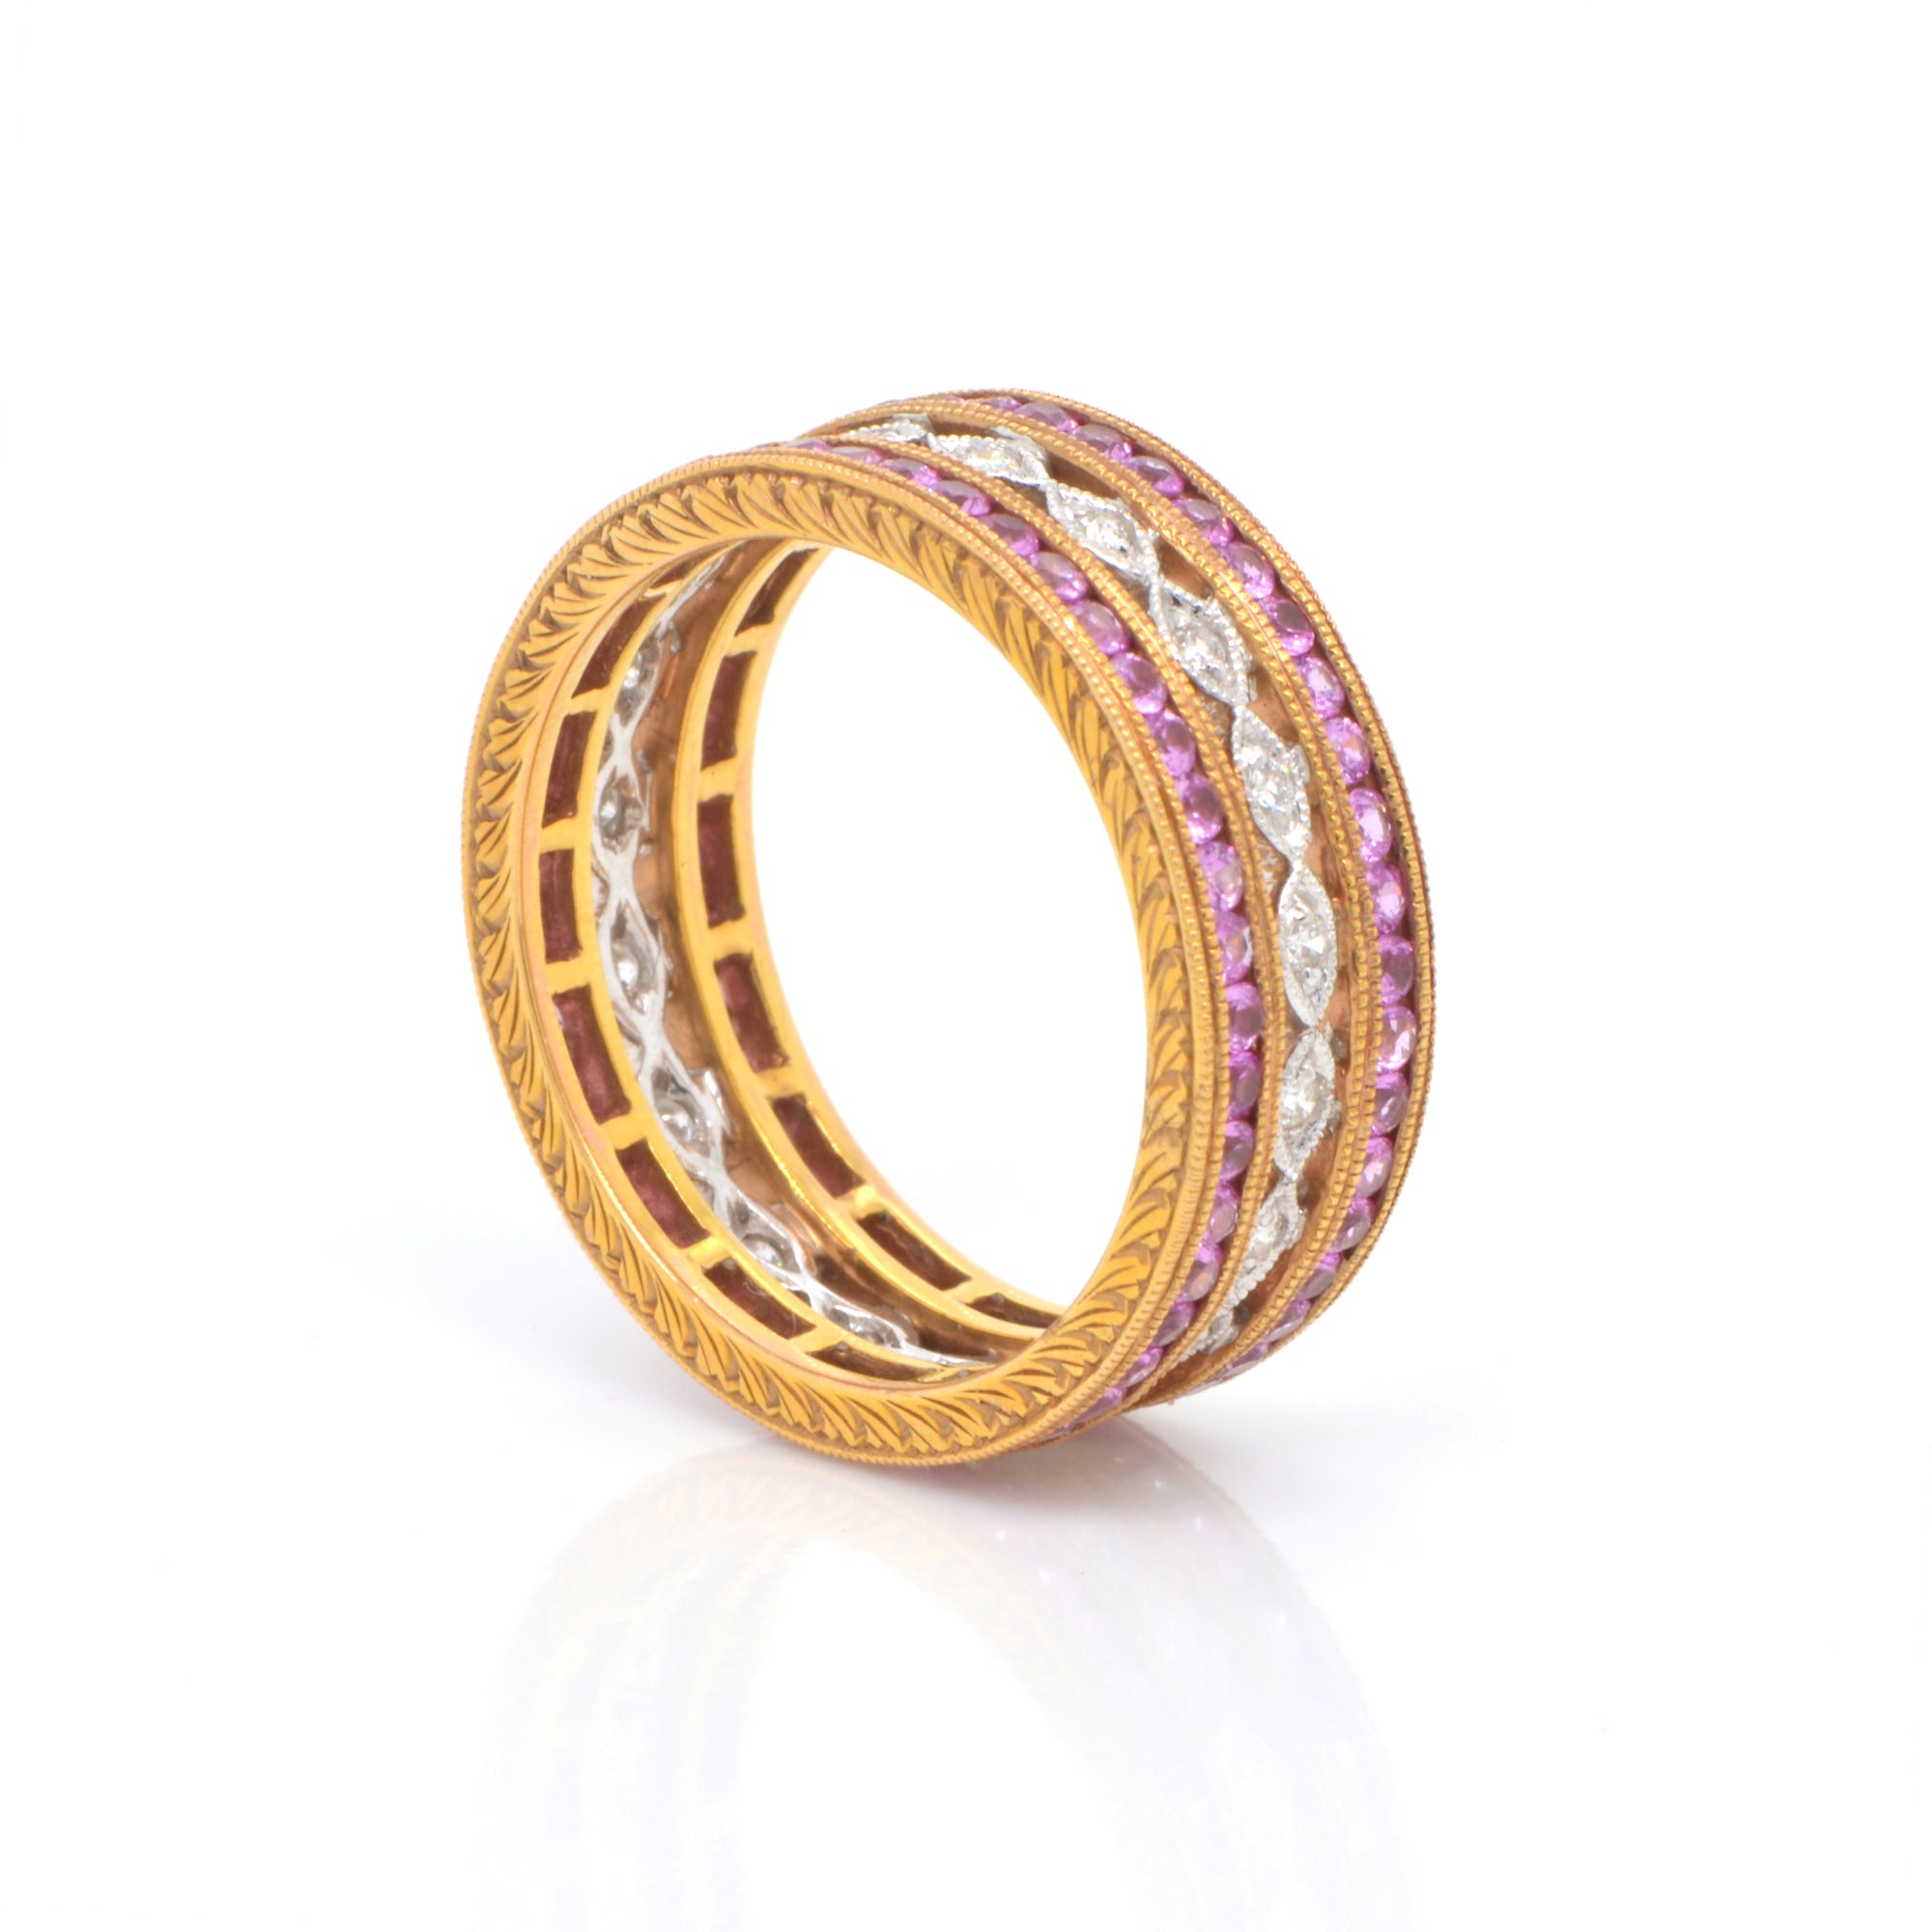 18K rose and white gold eternity band featuring rows of pink sapphires (1.35ctw) in rose gold, and round brilliant diamonds (0.14ctw) on a white gold band in a full eternity design. 